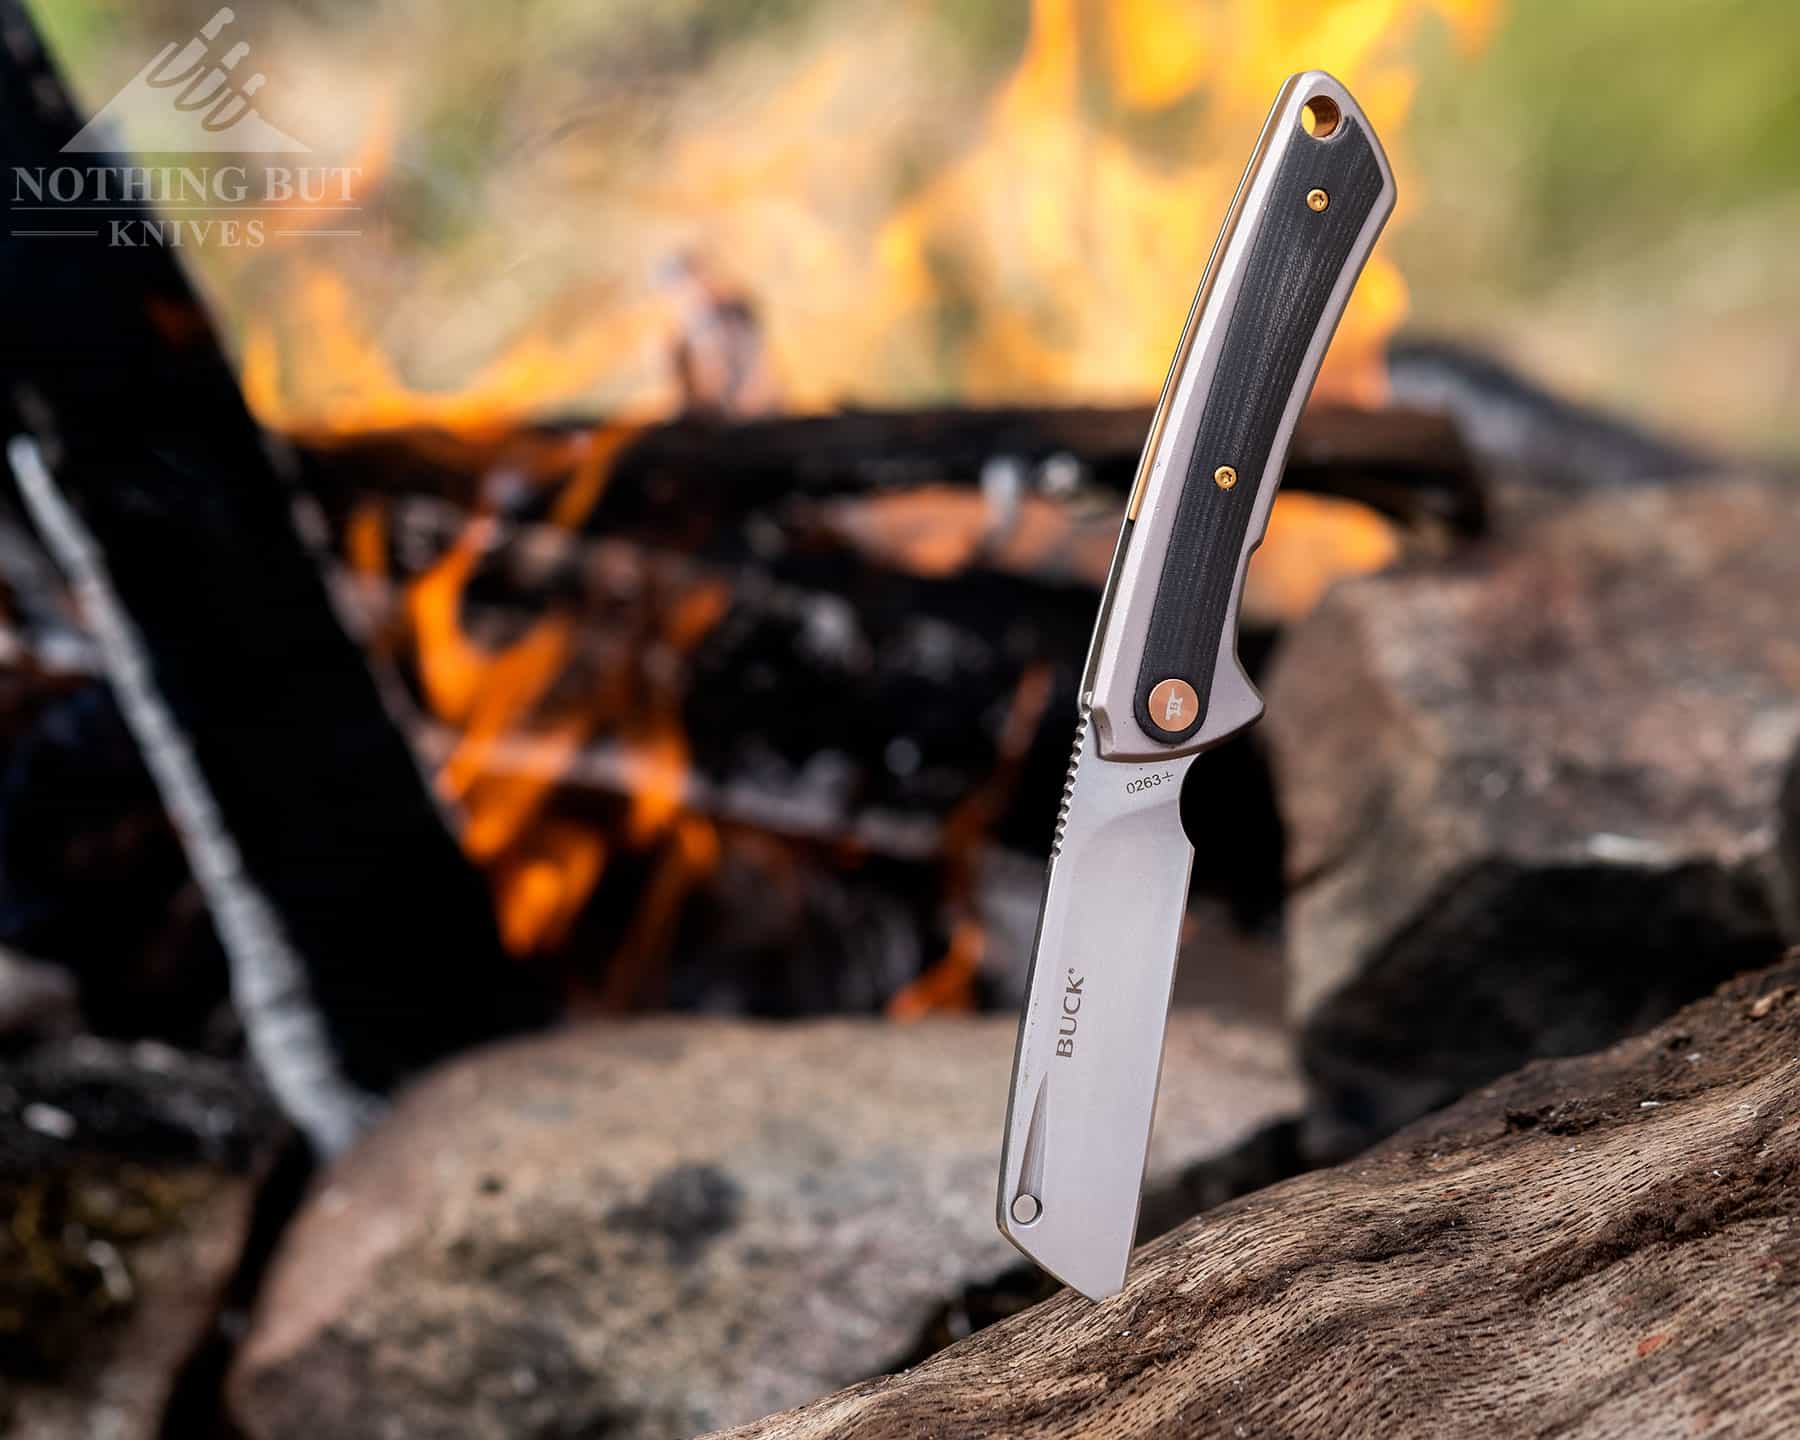 The HiLine is a godd option for anyone looking for a folding cleaver to take camping.